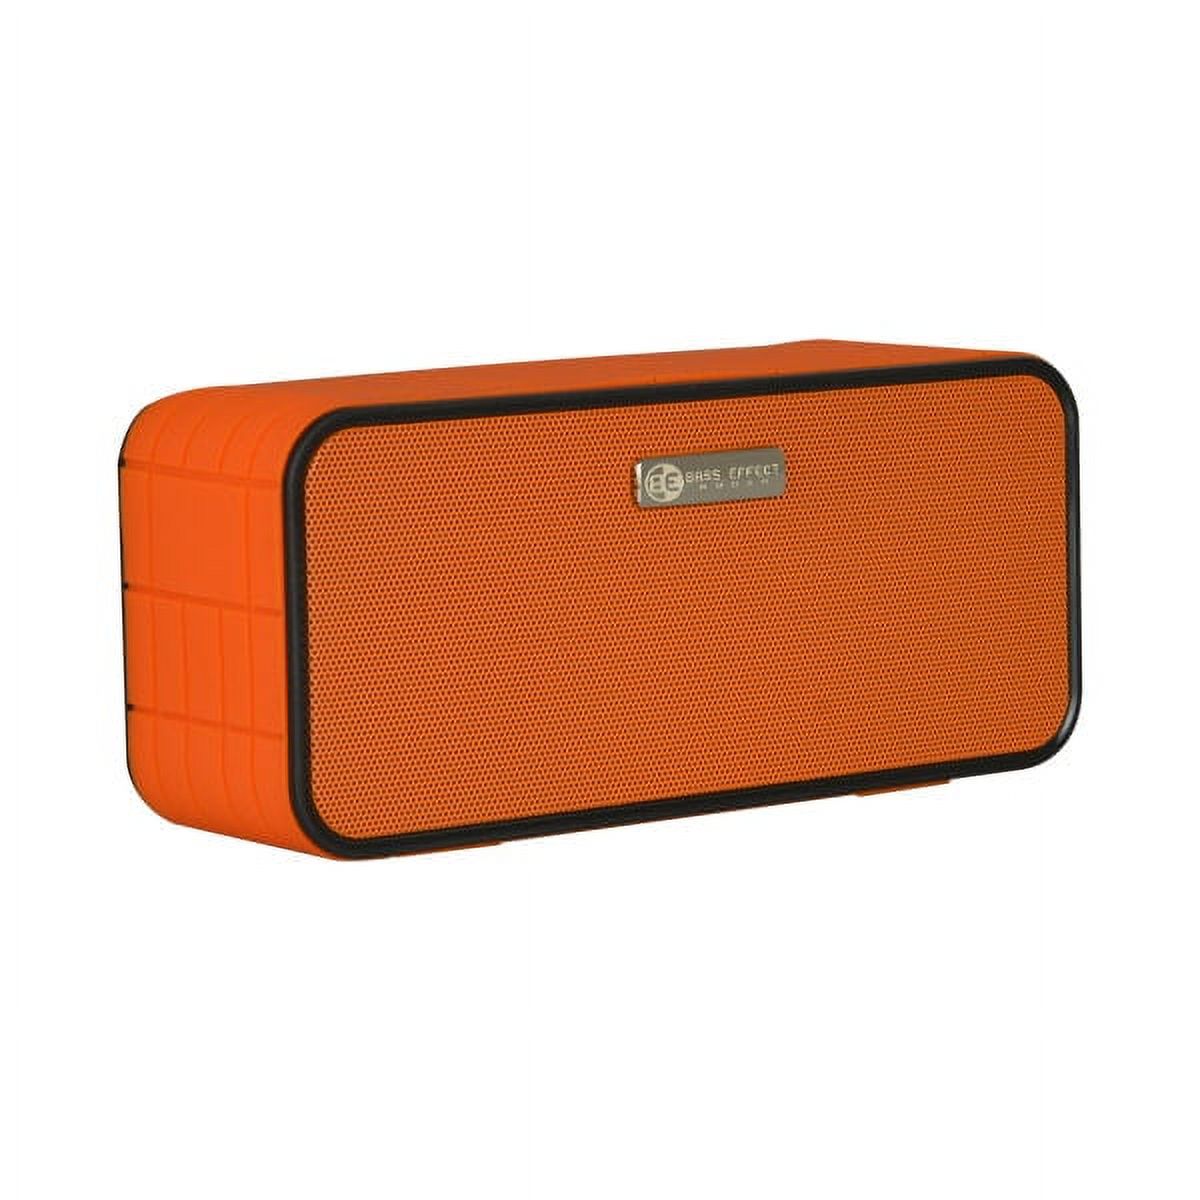 Bass Effect Audio XV Wireless Portable Bluetooth Stereo Speaker - image 2 of 5